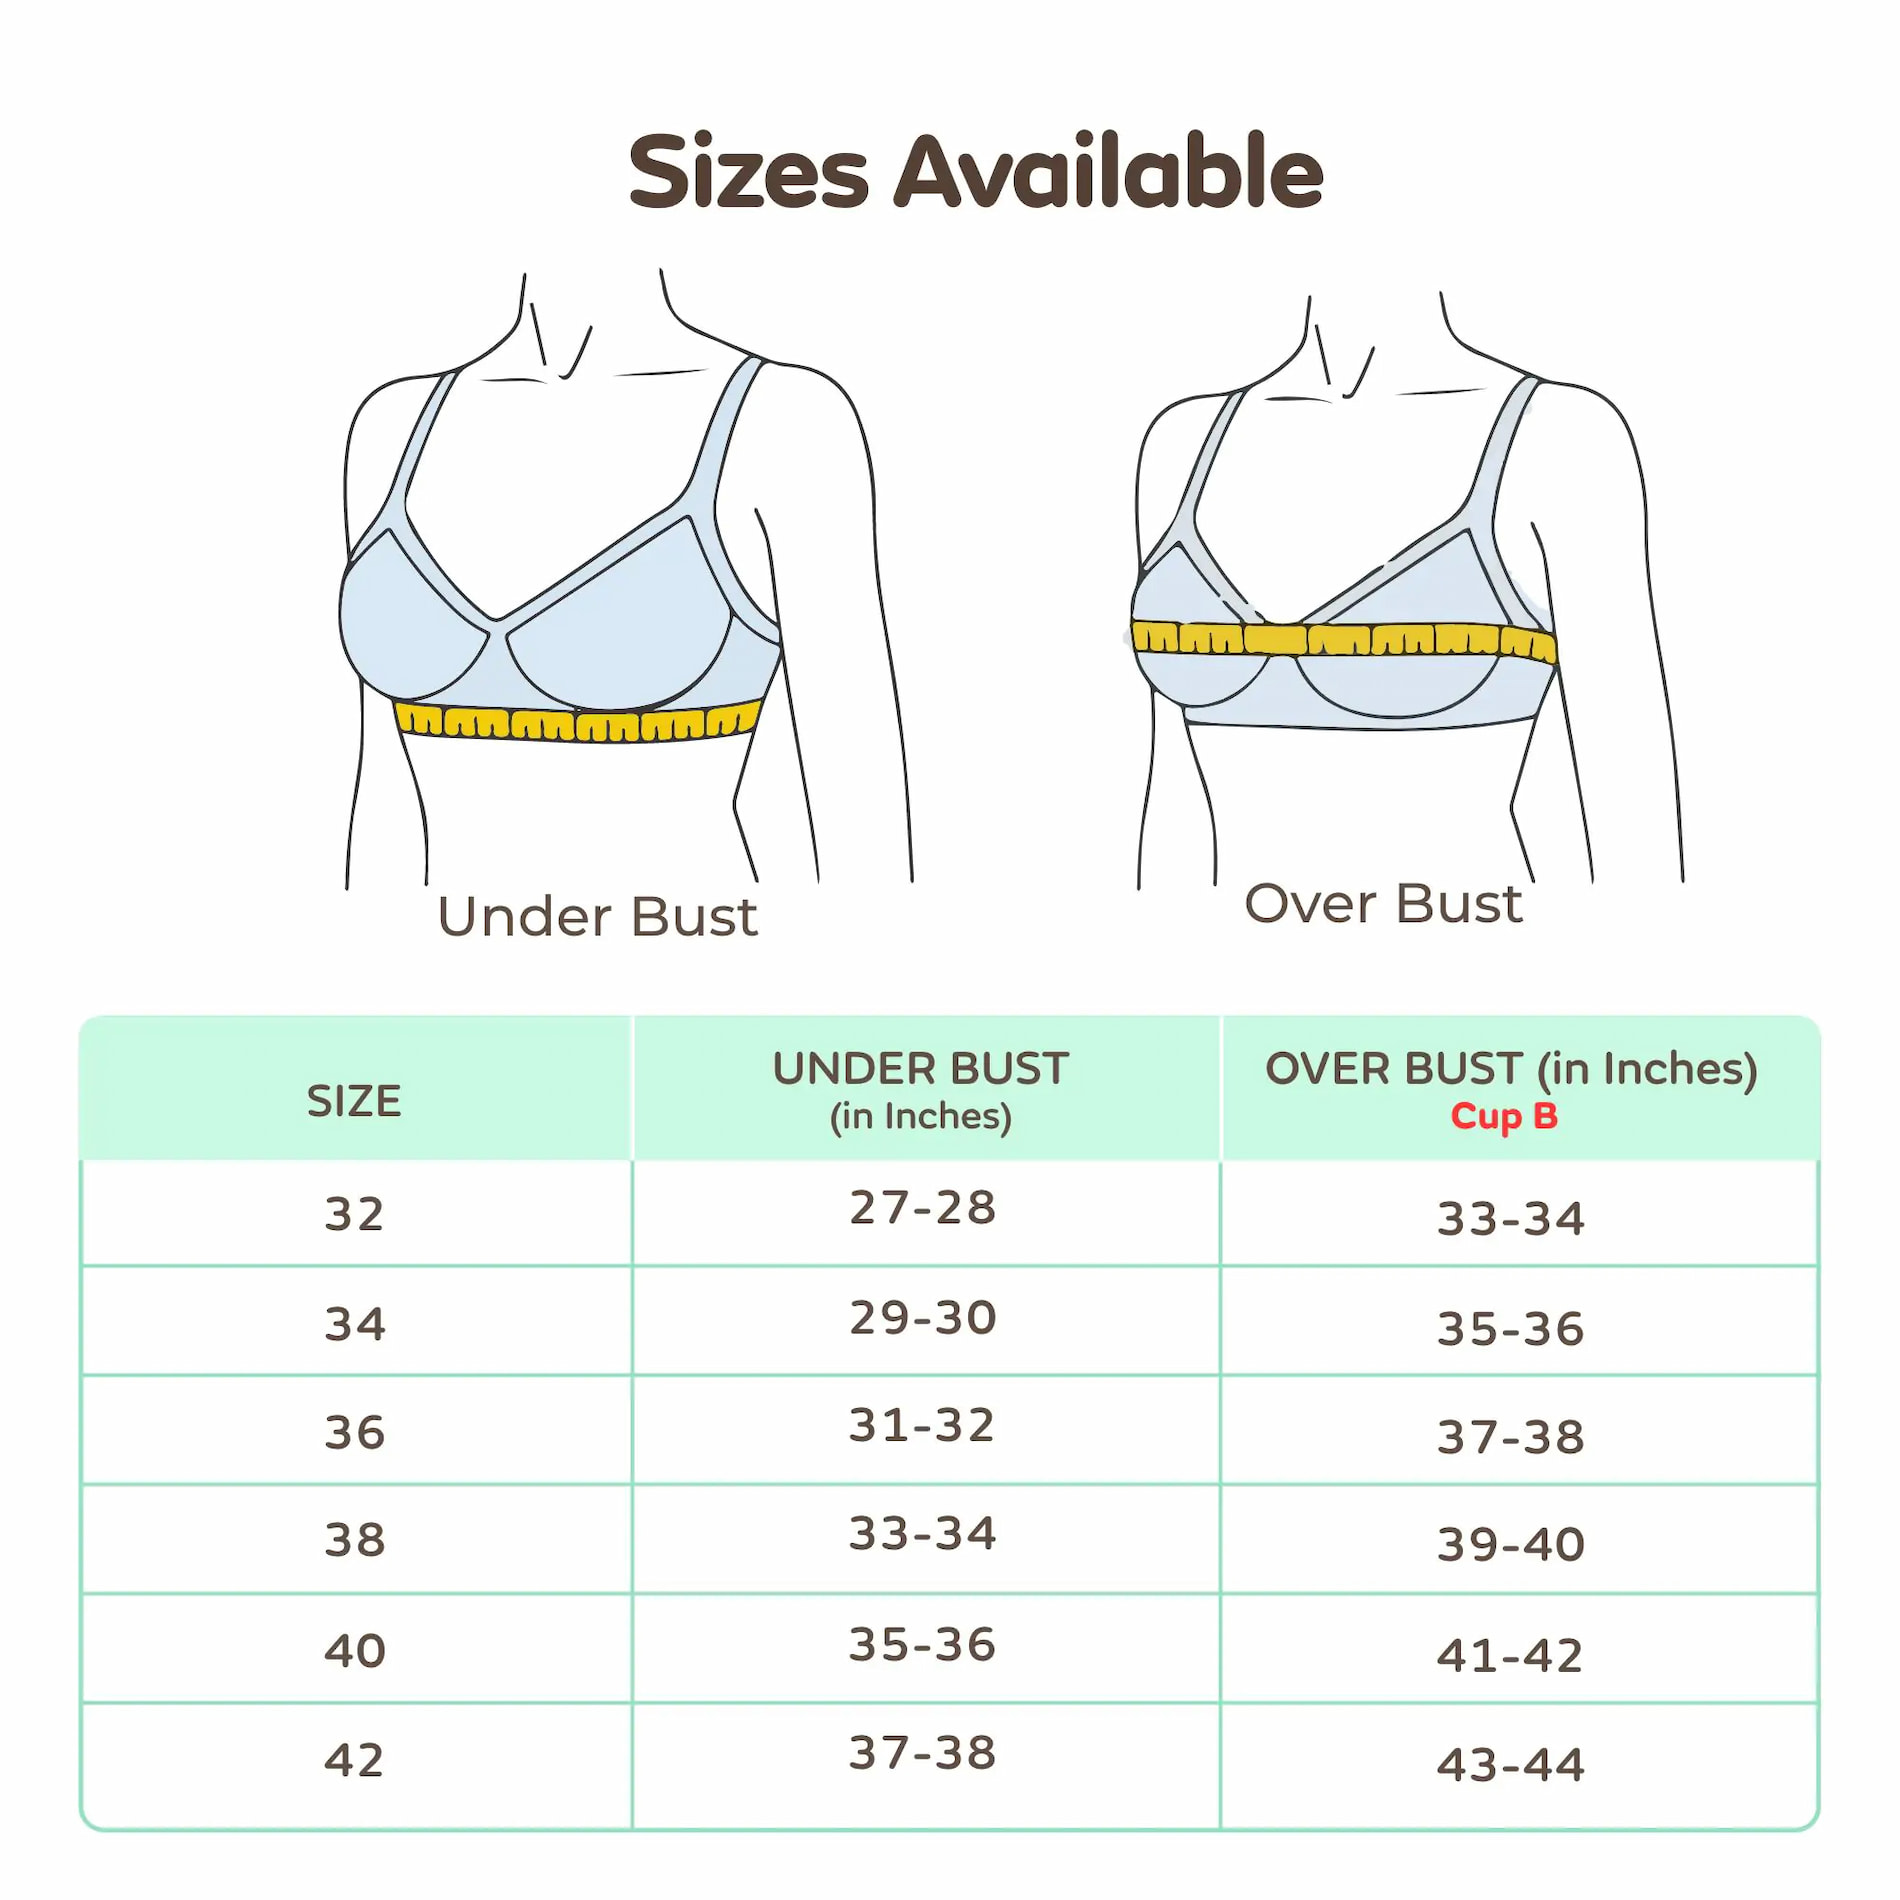 Mylo Maternity/Nursing Moulded Spacer Cup Bra Pack of 2 with free bra extender -(Coral, Navy) 40 B   